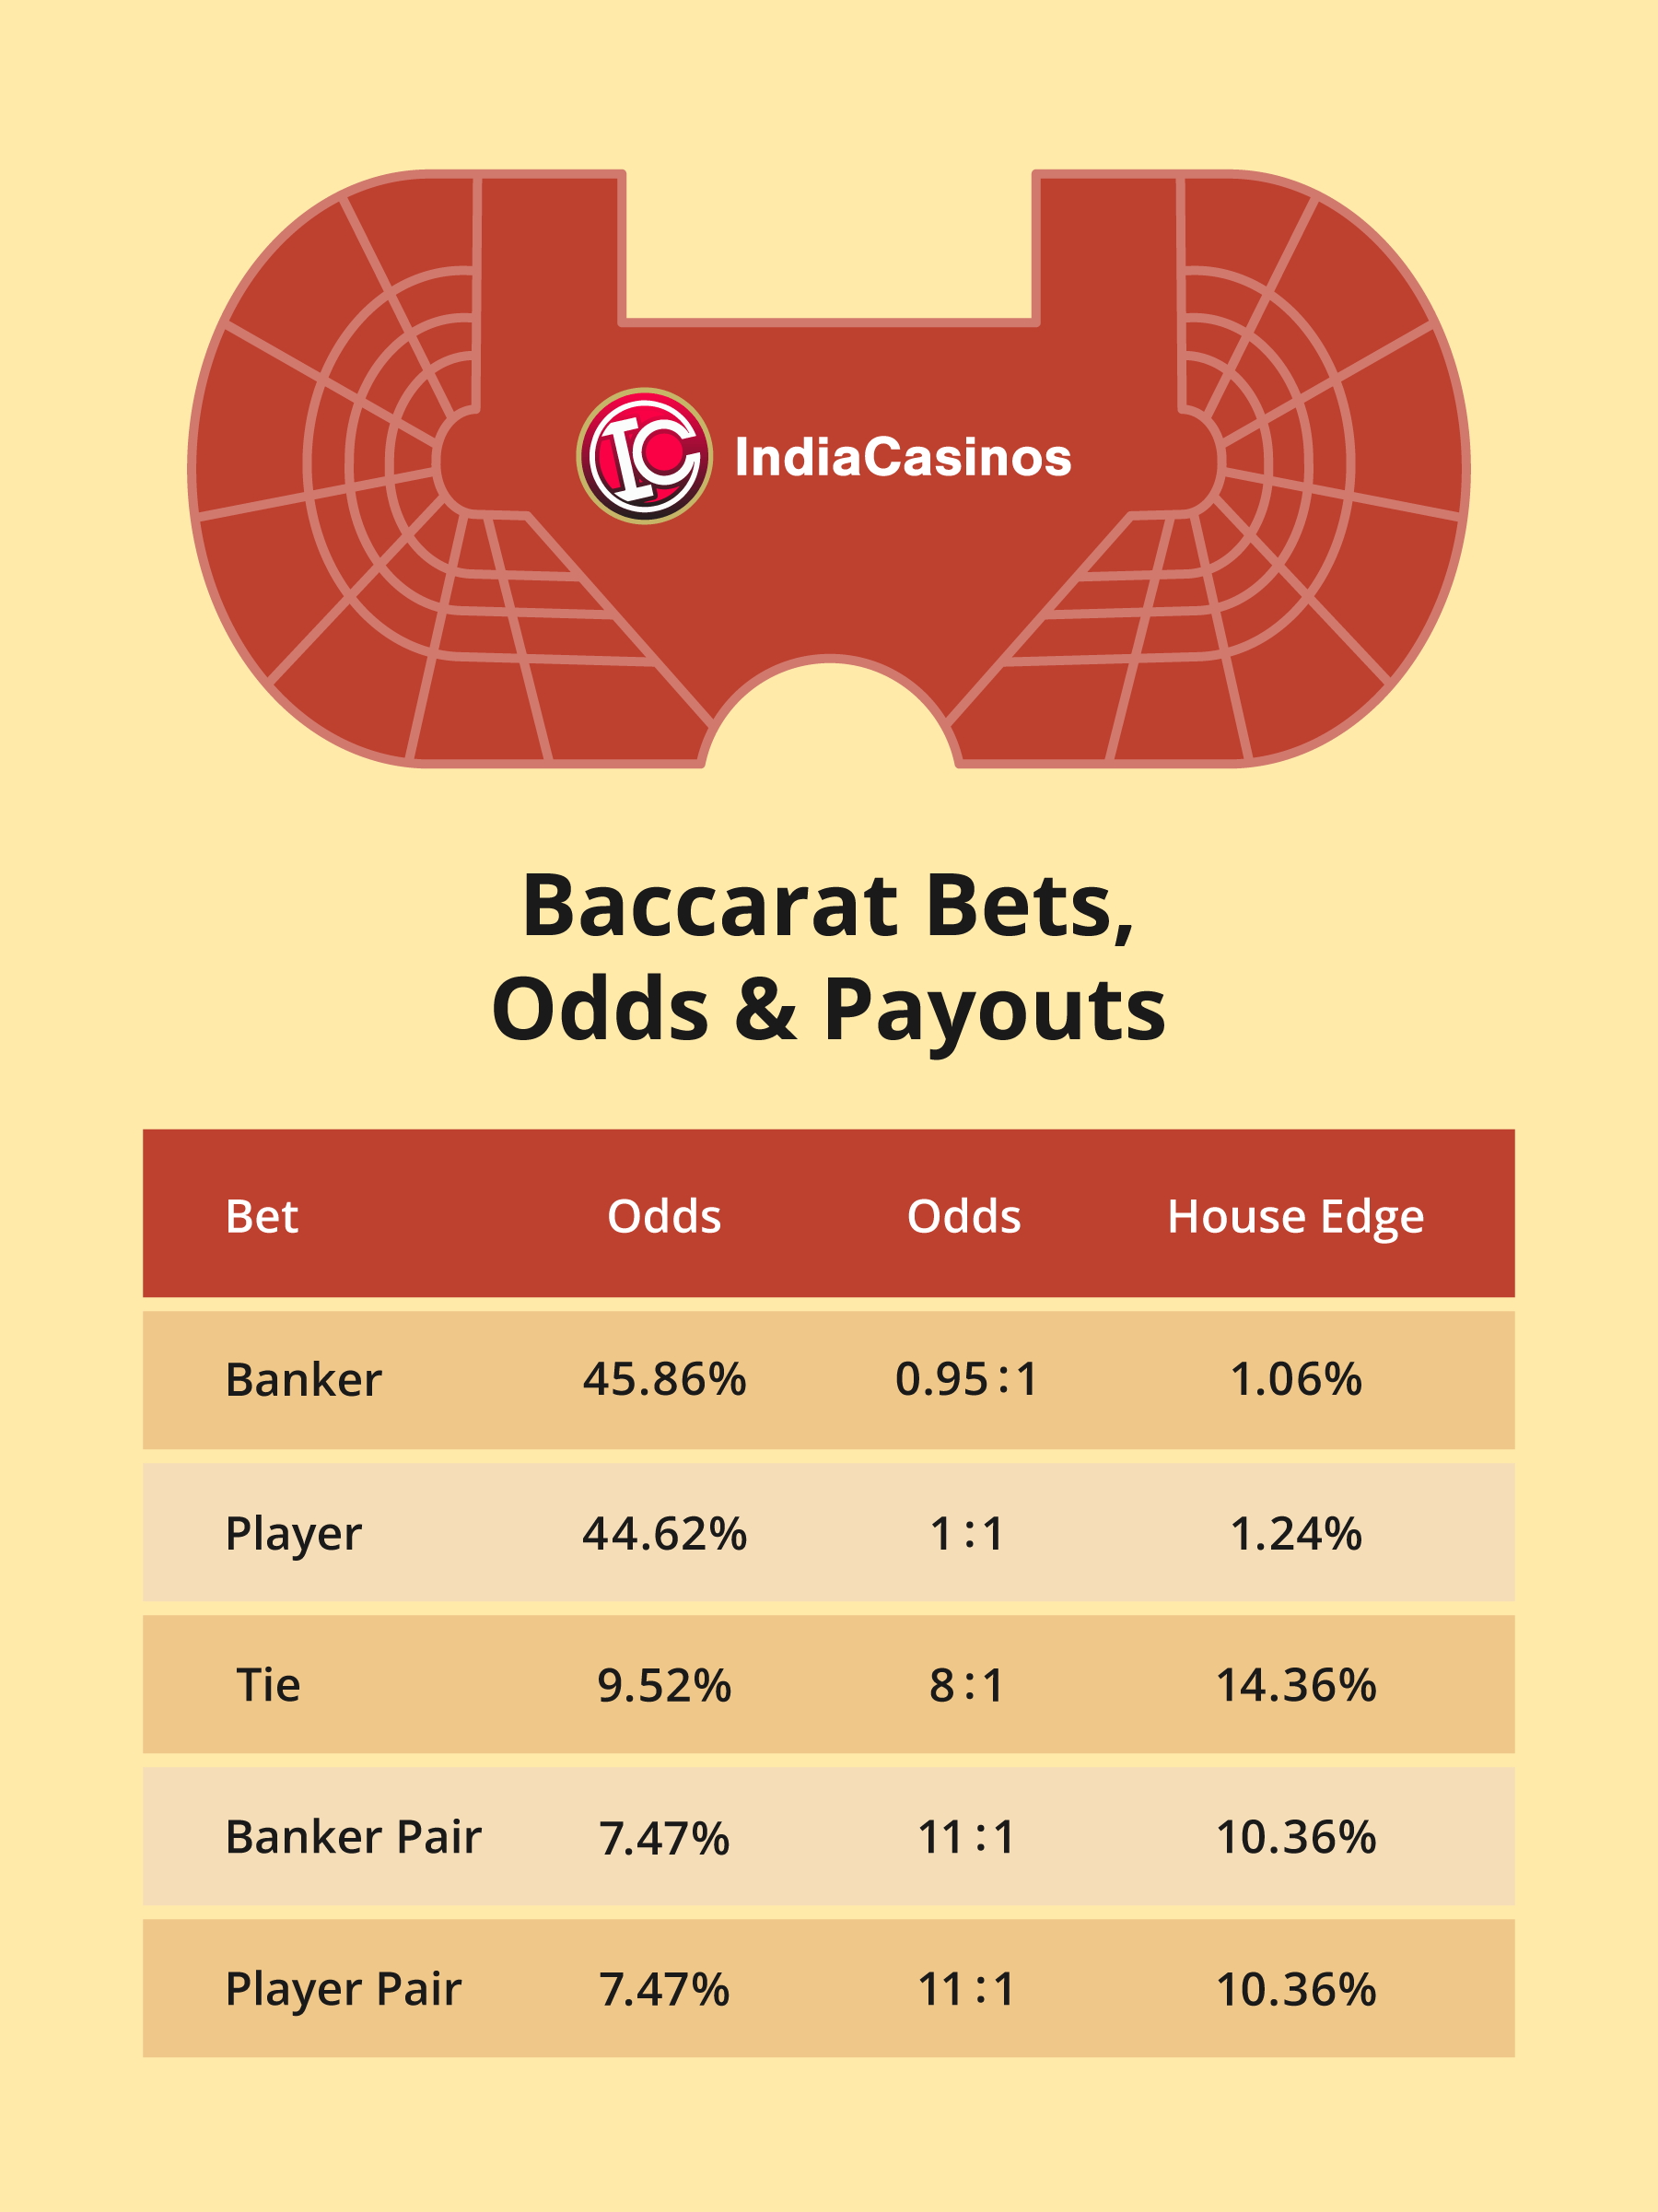 Baccarat Bets, Odds and Payouts infographic - India Casino